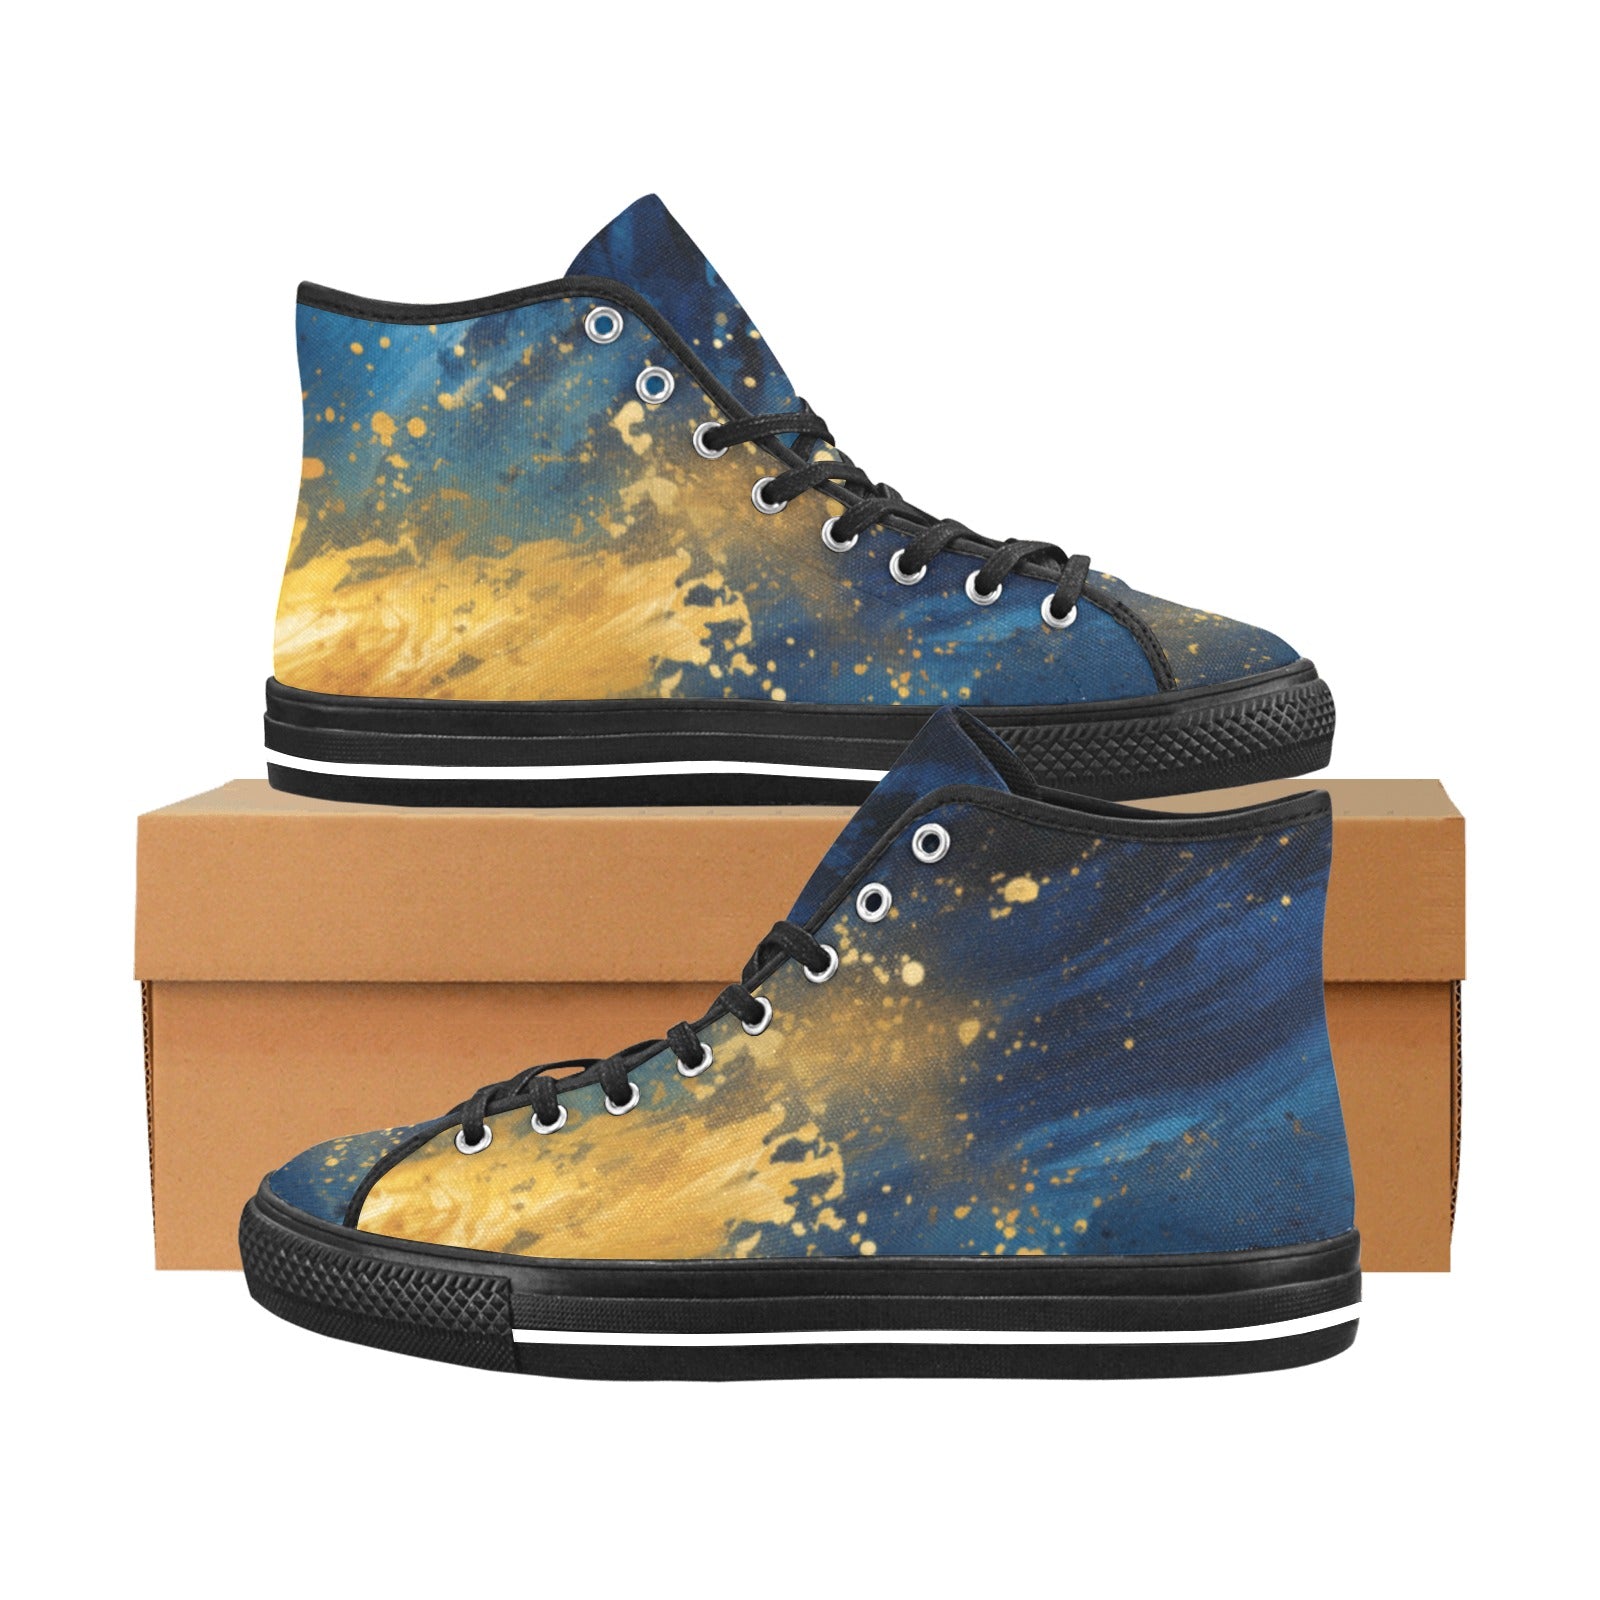 Gold & Blue Vancouver High Top Canvas Shoes for Women - Stylish & Personalized